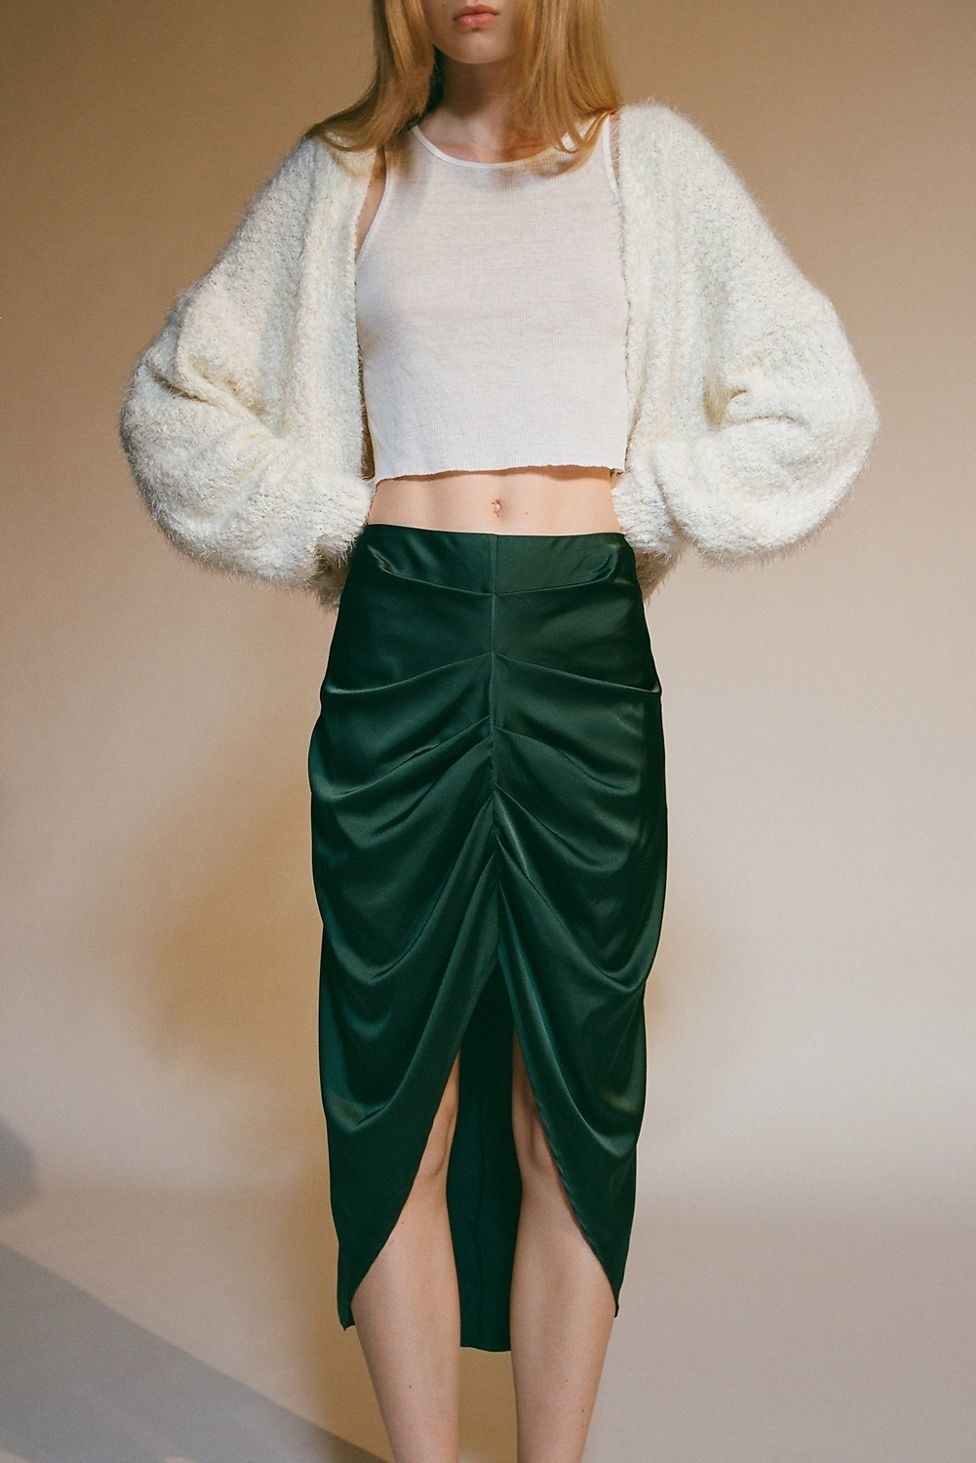 model in an emerald green draped skirt with a ruche up the center